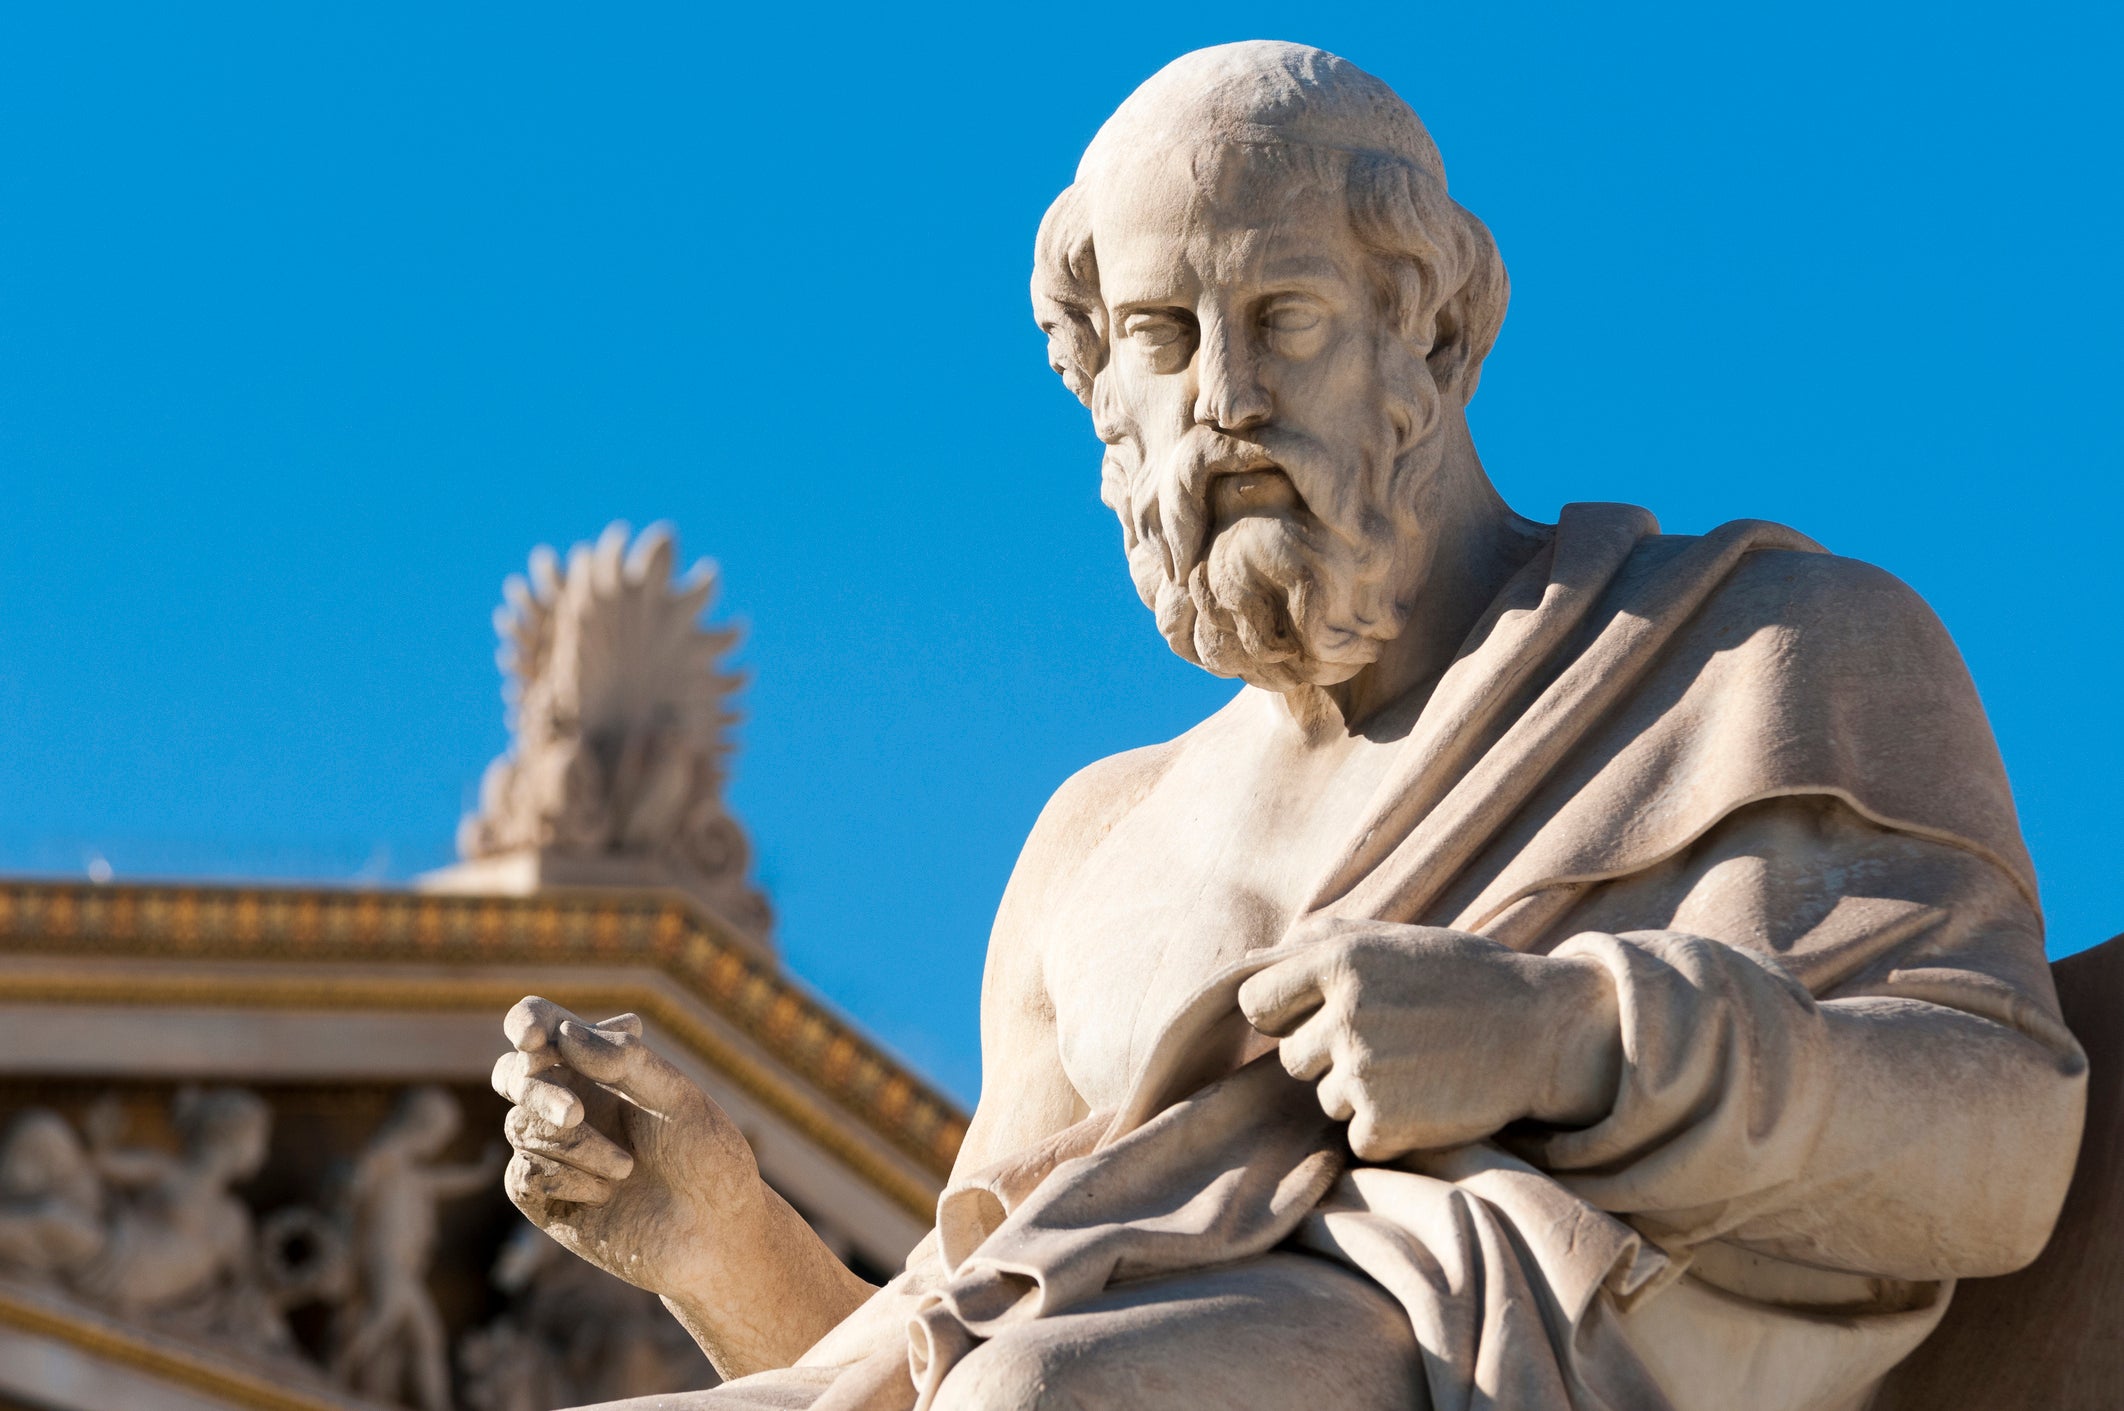 Plato’s statue at the Academy of Athens